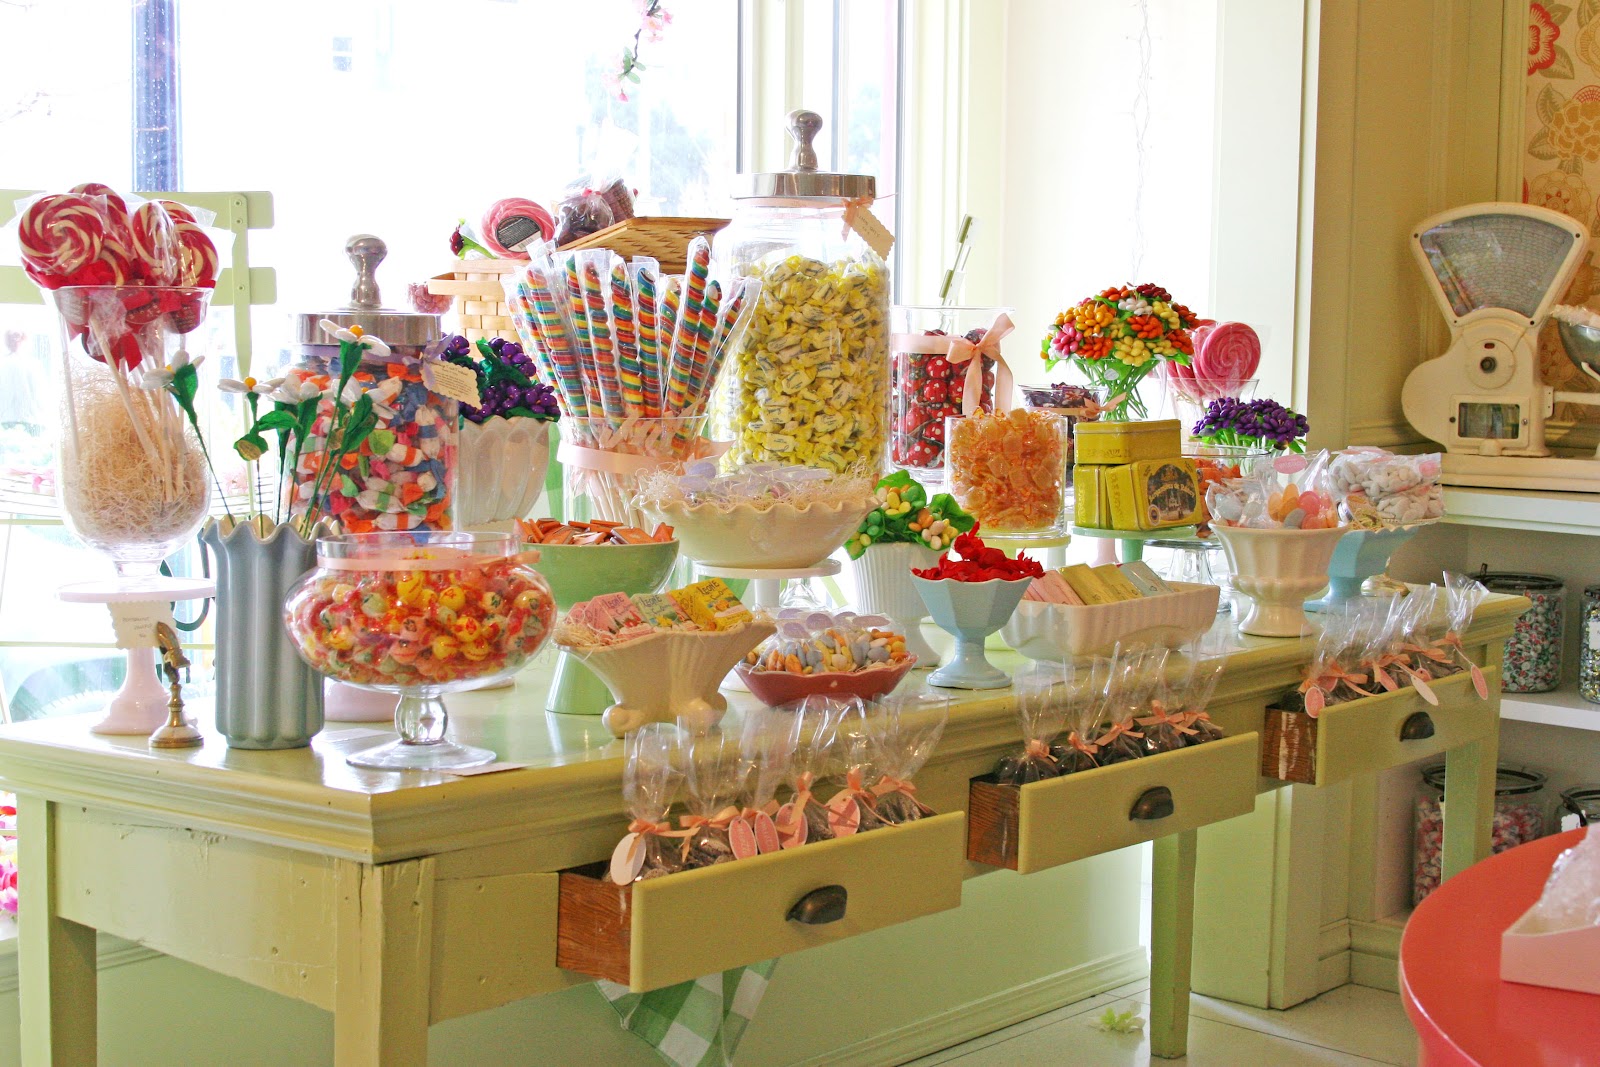 miette-old-fashioned-candy-shop1.jpg